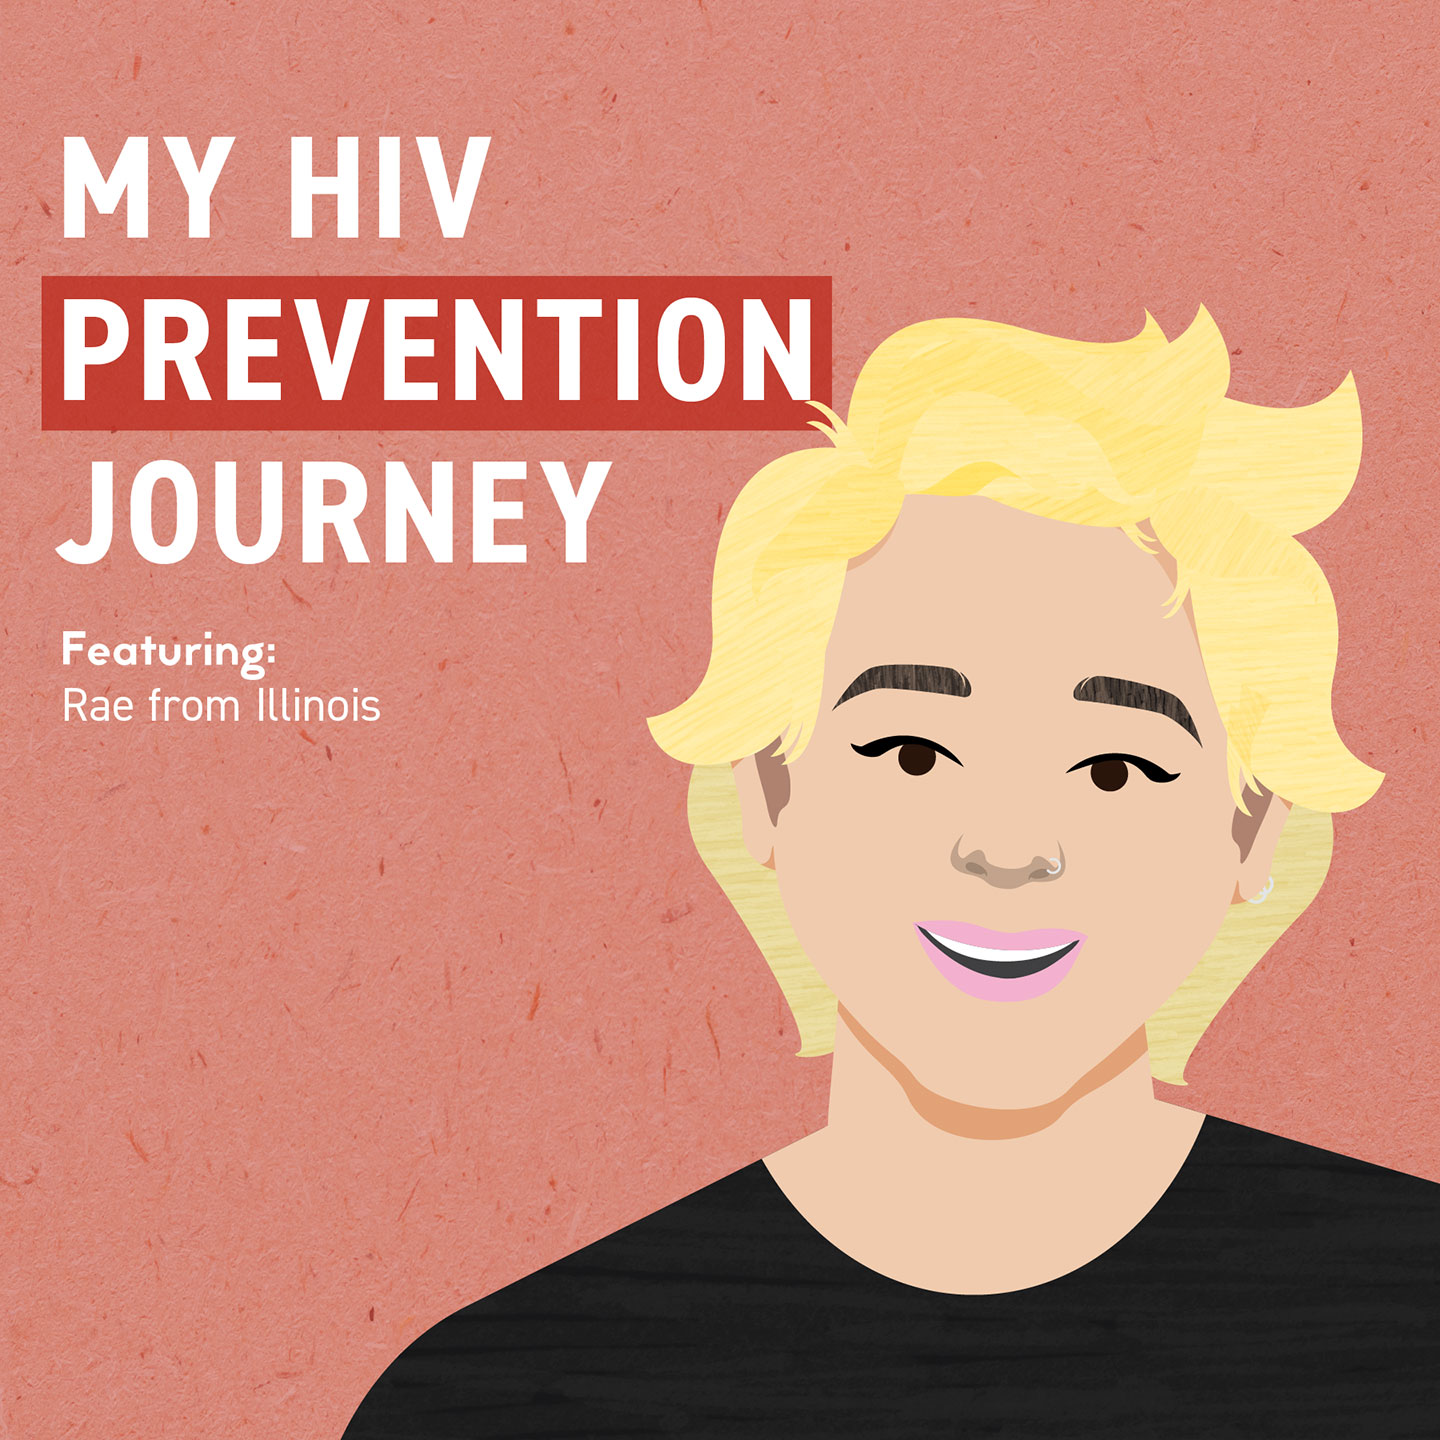 Person smiling. My HIV Prevention Journey. Featuring: Rae from Illinois